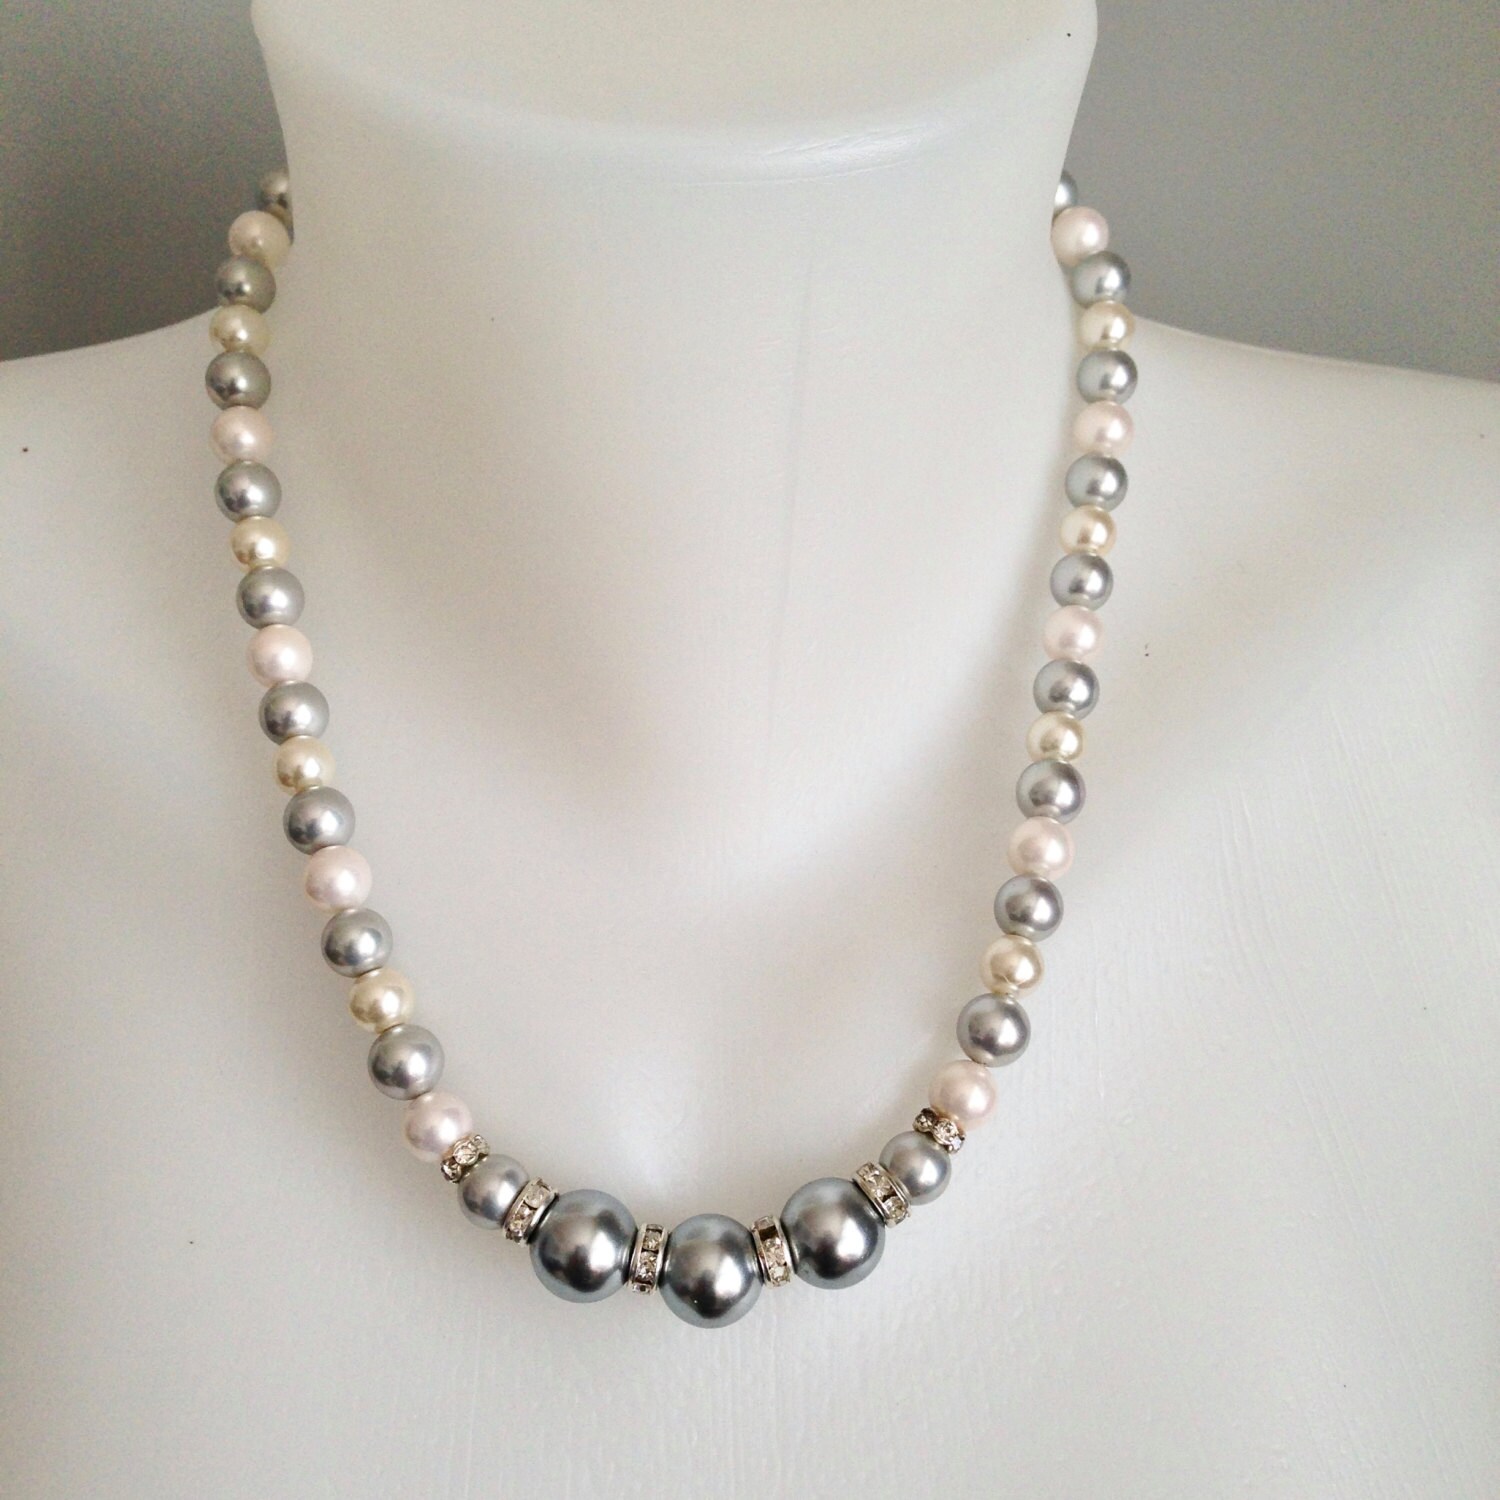 Shell pearl necklace Statement necklace Grey & white